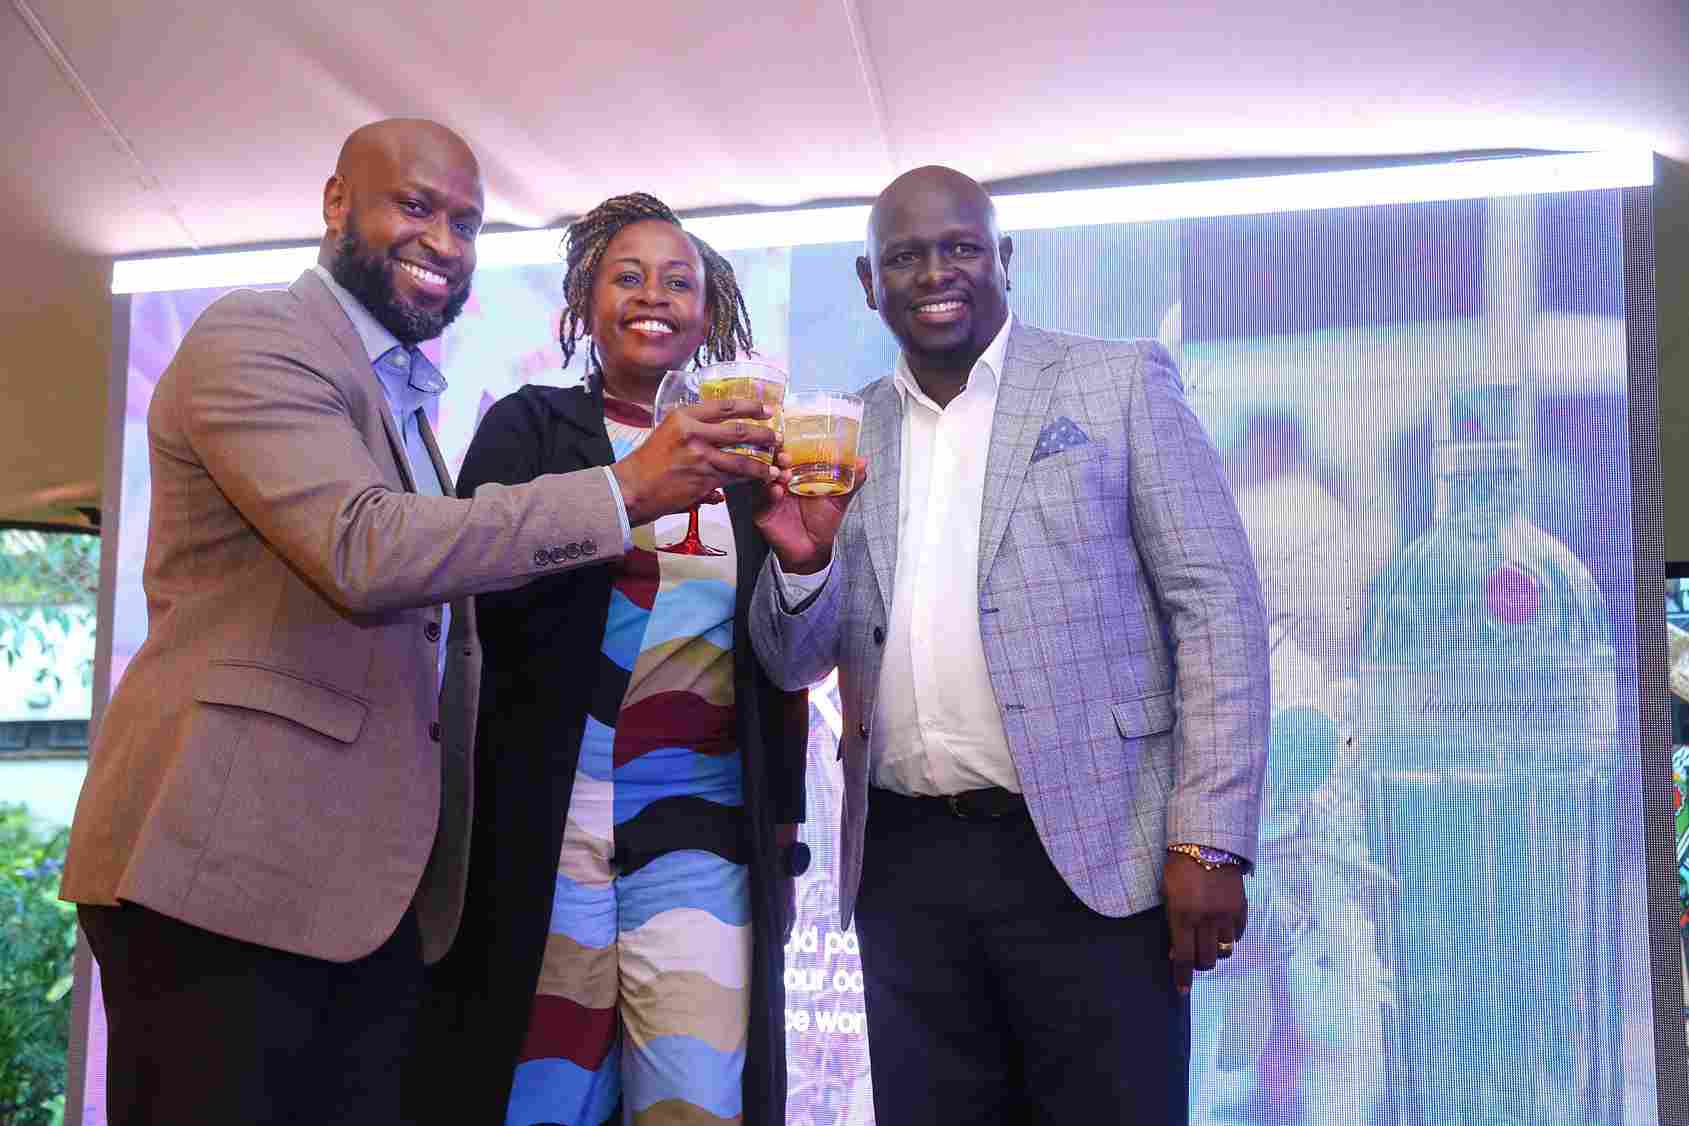 EABL Commercial Director, Joel Kamau, EABL Head of Media Features, Waithera Kabiru, and EABL Head of Emerging Channels, Kerago Ngugi after launching The Bar Soiree Launch event at Village creative